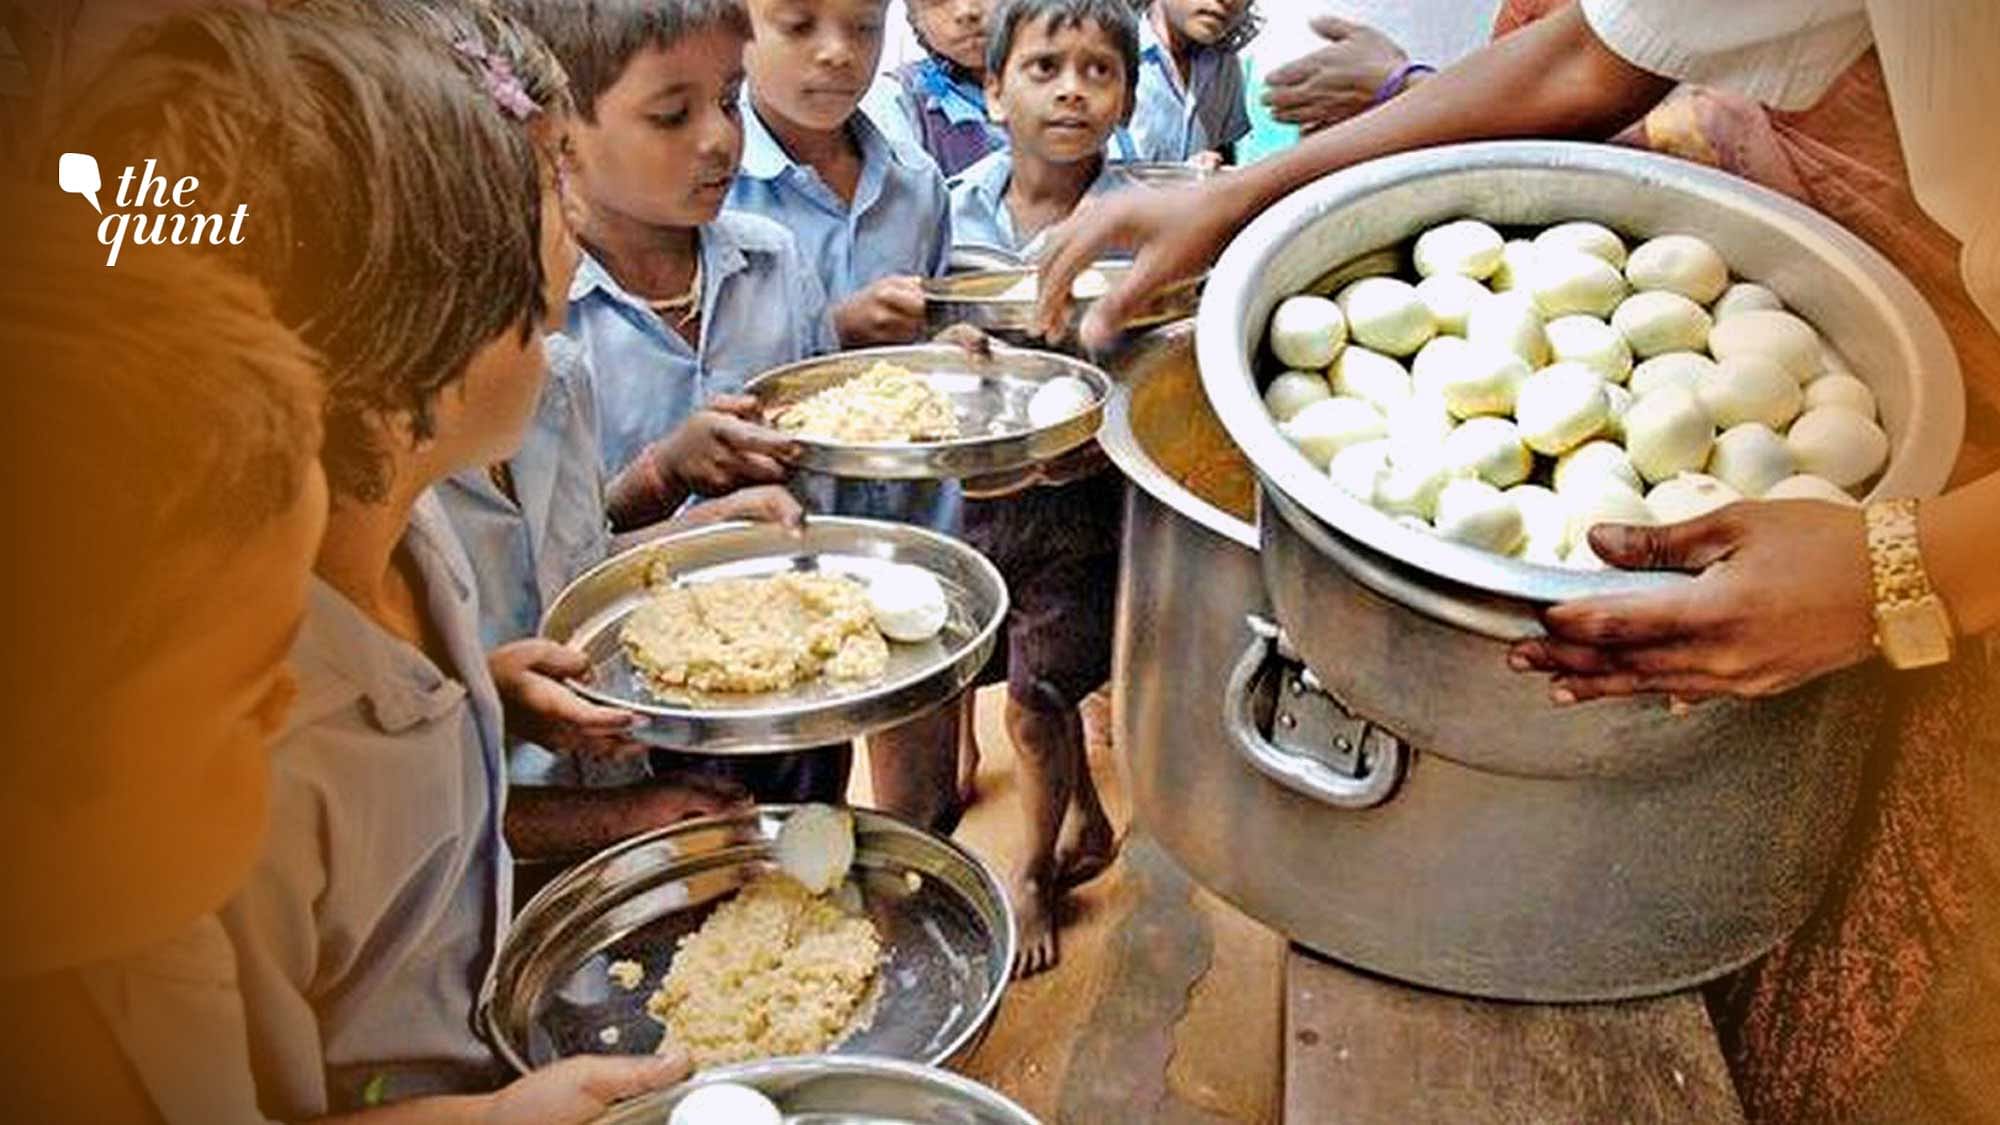 <div class="paragraphs"><p>The Supreme Court on Monday, 2 May, ordered the continuation of the Kerala High Court's interim order, which directed the Lakshadweep administration to continue providing non-vegetarian items, including meat and chicken, in the mid-day meals at schools and allow the operation of dairy farms in the region.</p></div>